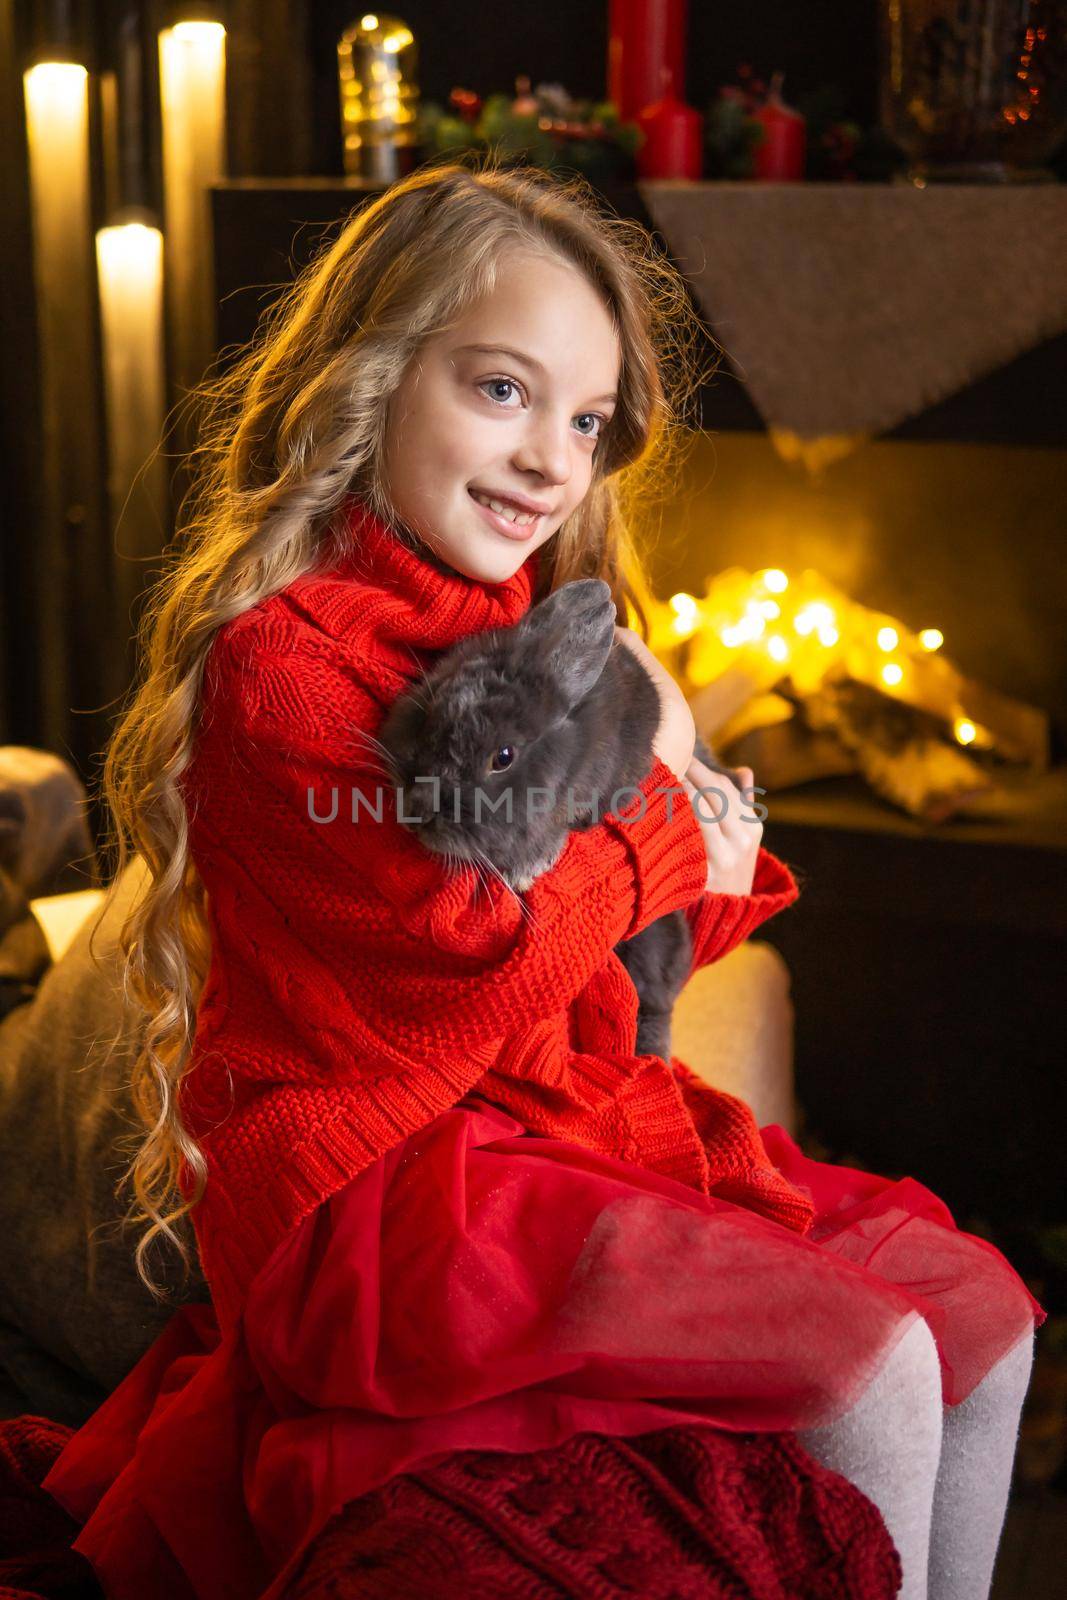 A little blonde girl with a gray rabbit in her arms next to a Christmas tree decorated with garlands by Annu1tochka